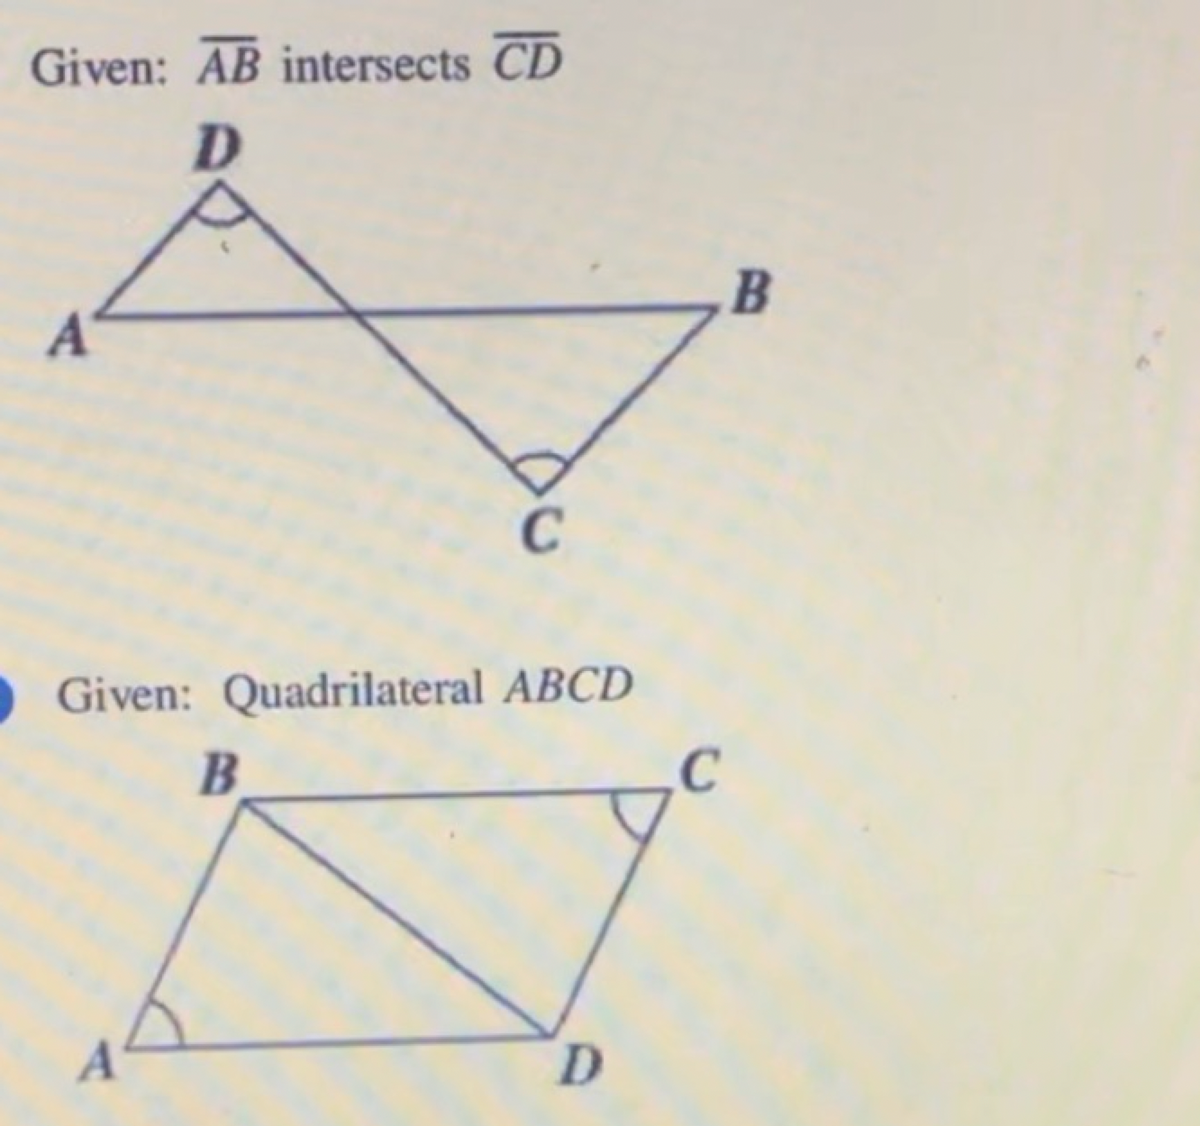 Given: AB intersects CD
B
C
Given: Quadrilateral ABCD
D.
